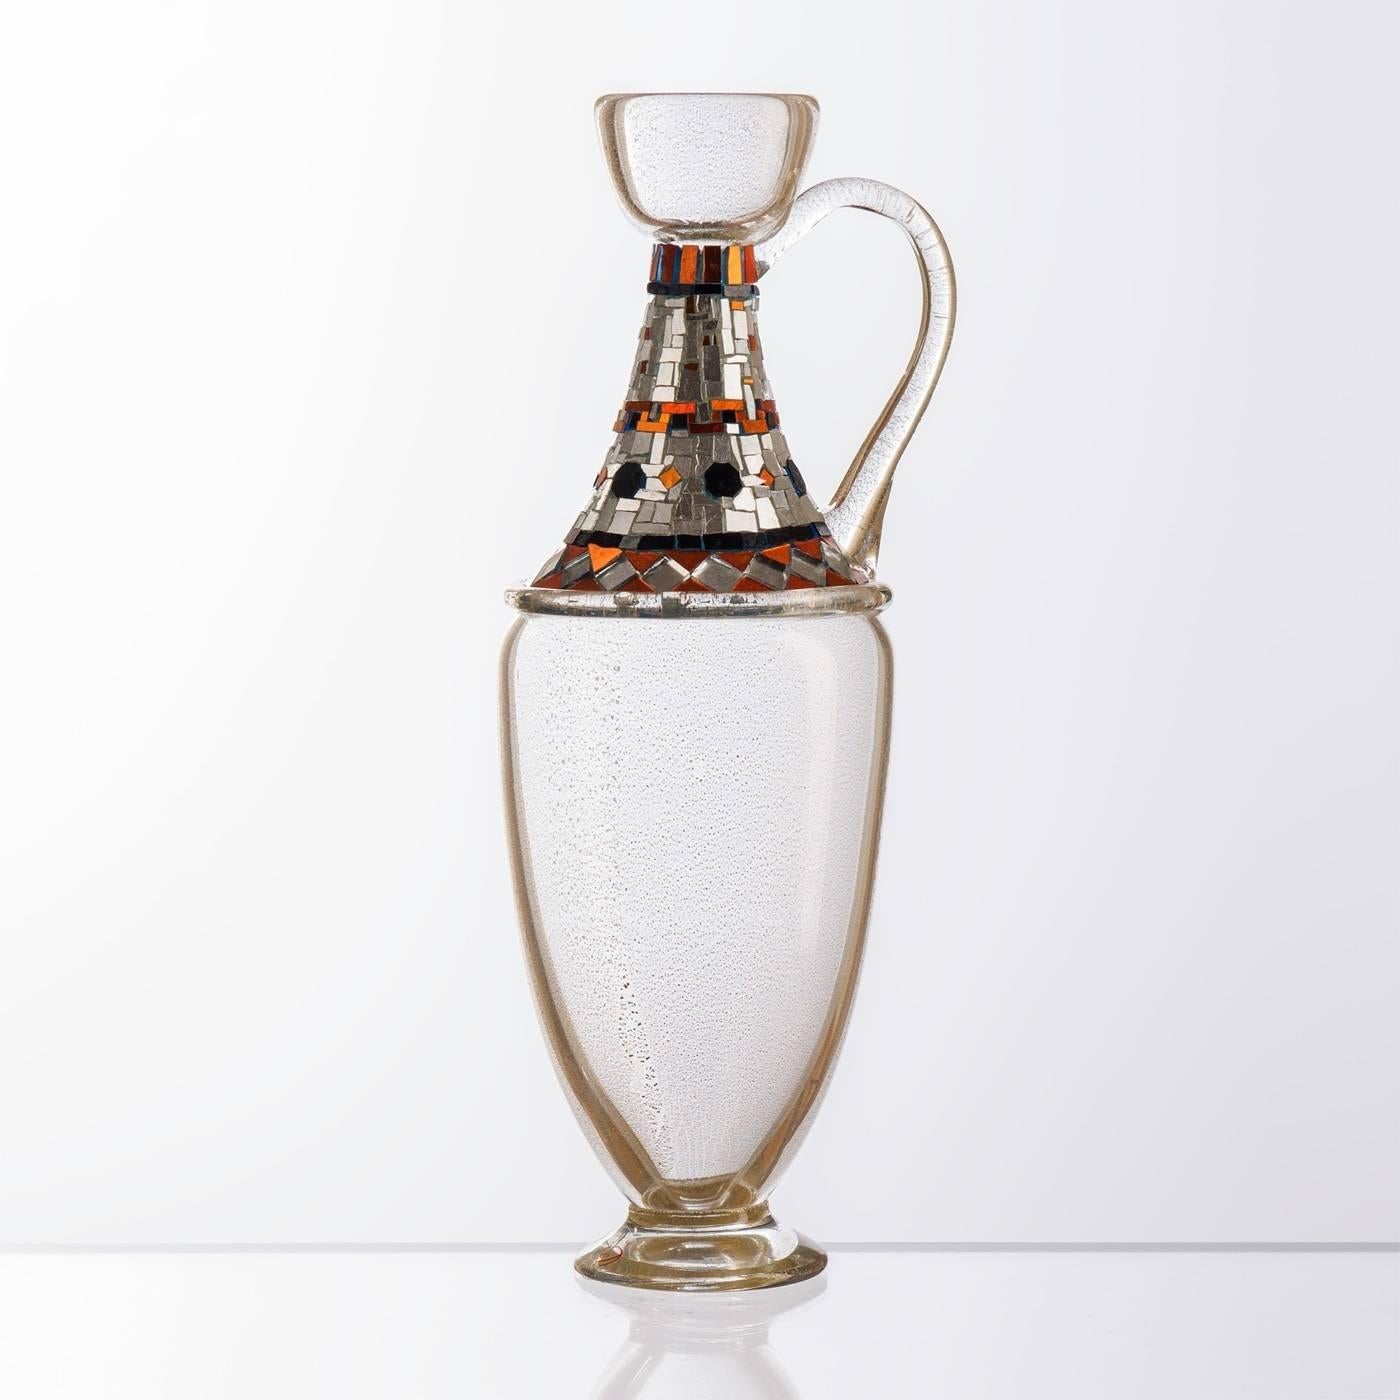 Inspired by ancient Greek art, and more specifically by the famous Lekythos vases of the 5th century BC, this unique vase is part of the art collection. Handcrafted in Murano by master glassblowers using gold and crystal mouth-blown glass, the